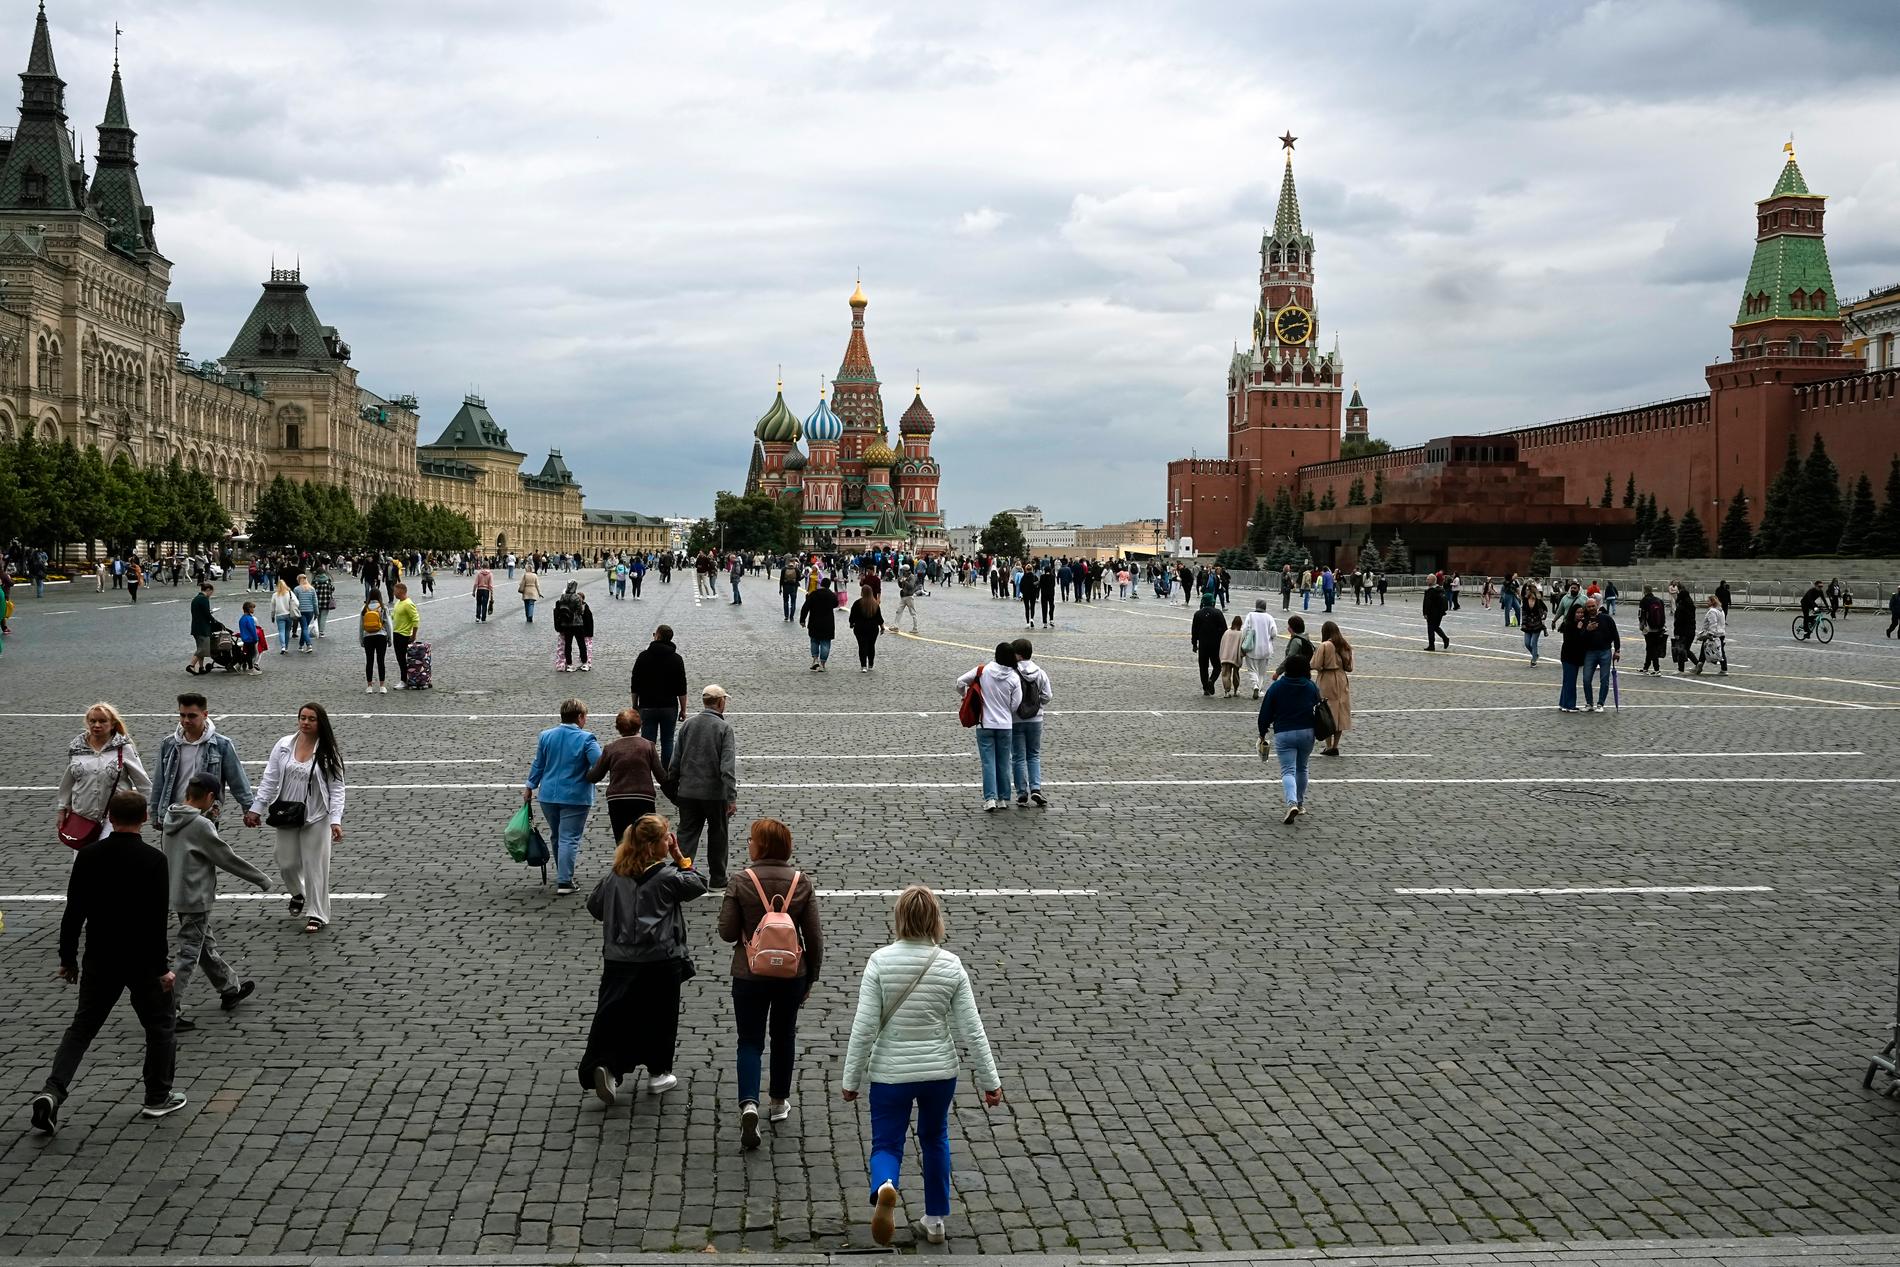 The Resigned Russian: Living Under Corrupt Regime and Limited Resources